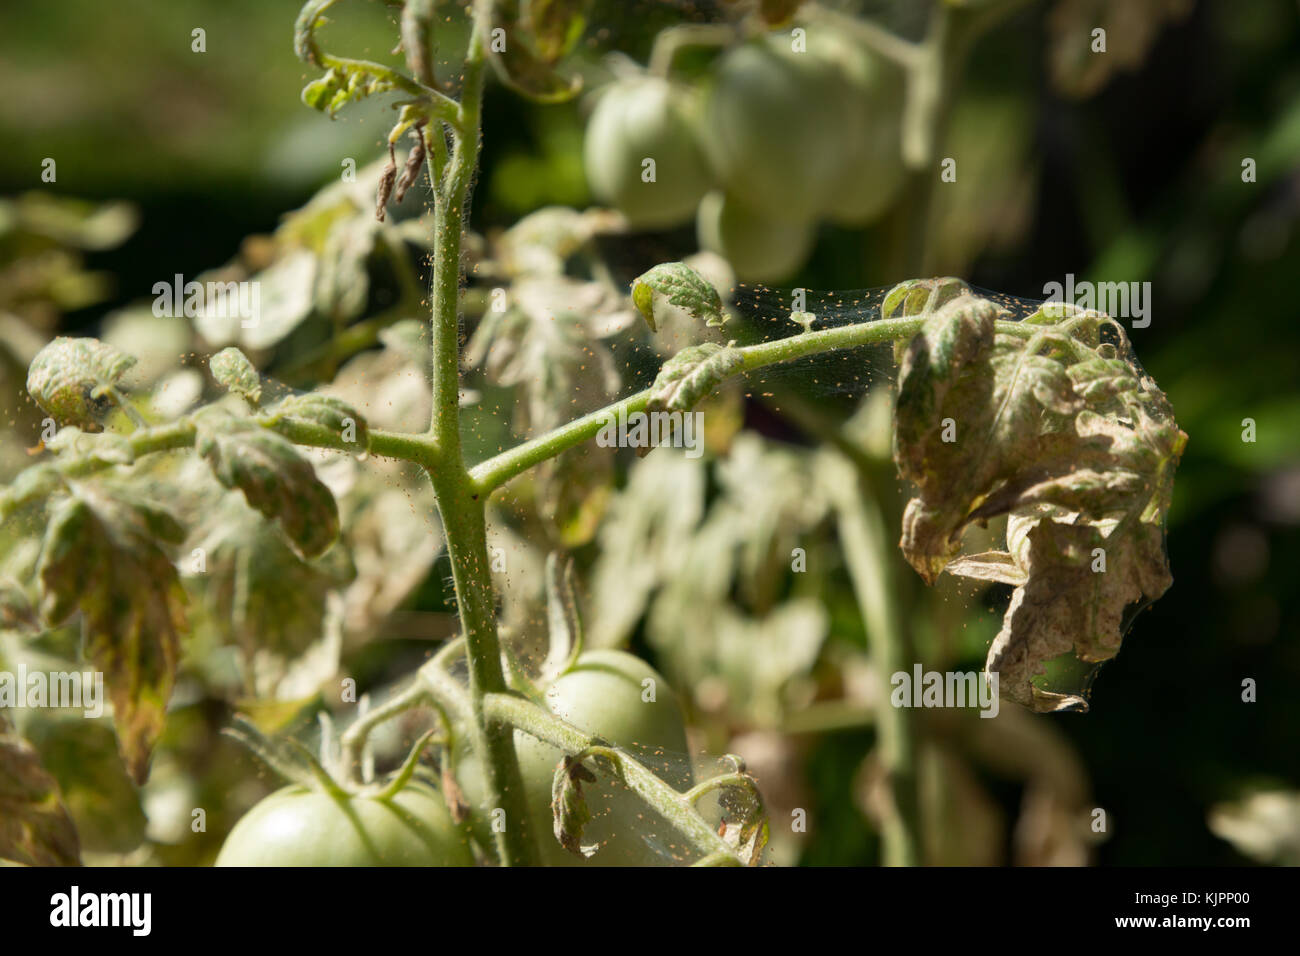 Asuncion, Paraguay. 28th Nov, 2017. Hot and dry weather conditions greatly favor spider mite rapid development and reproduction. Spider mites infestation and damage on a organic tomato plant is seen during sunny day, Asuncion, Paraguay. Credit: Andre M. Chang/ARDUOPRESS/Alamy Live News Stock Photo